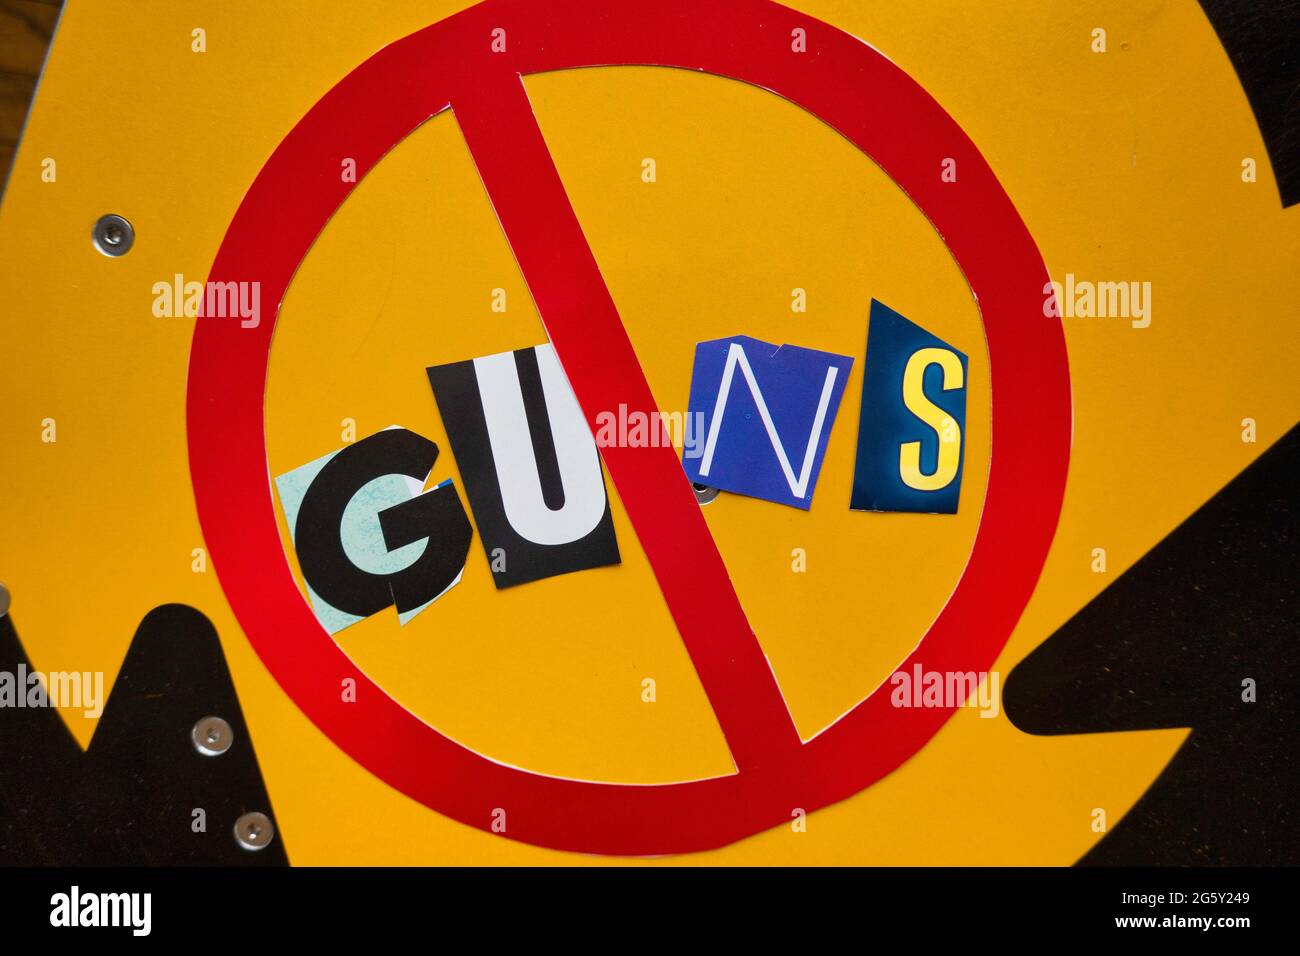 The Concept of 'Cancel Guns' using cut-out paper letters in the ransom note effect typography inside The International NO Symbol, USA Stock Photo